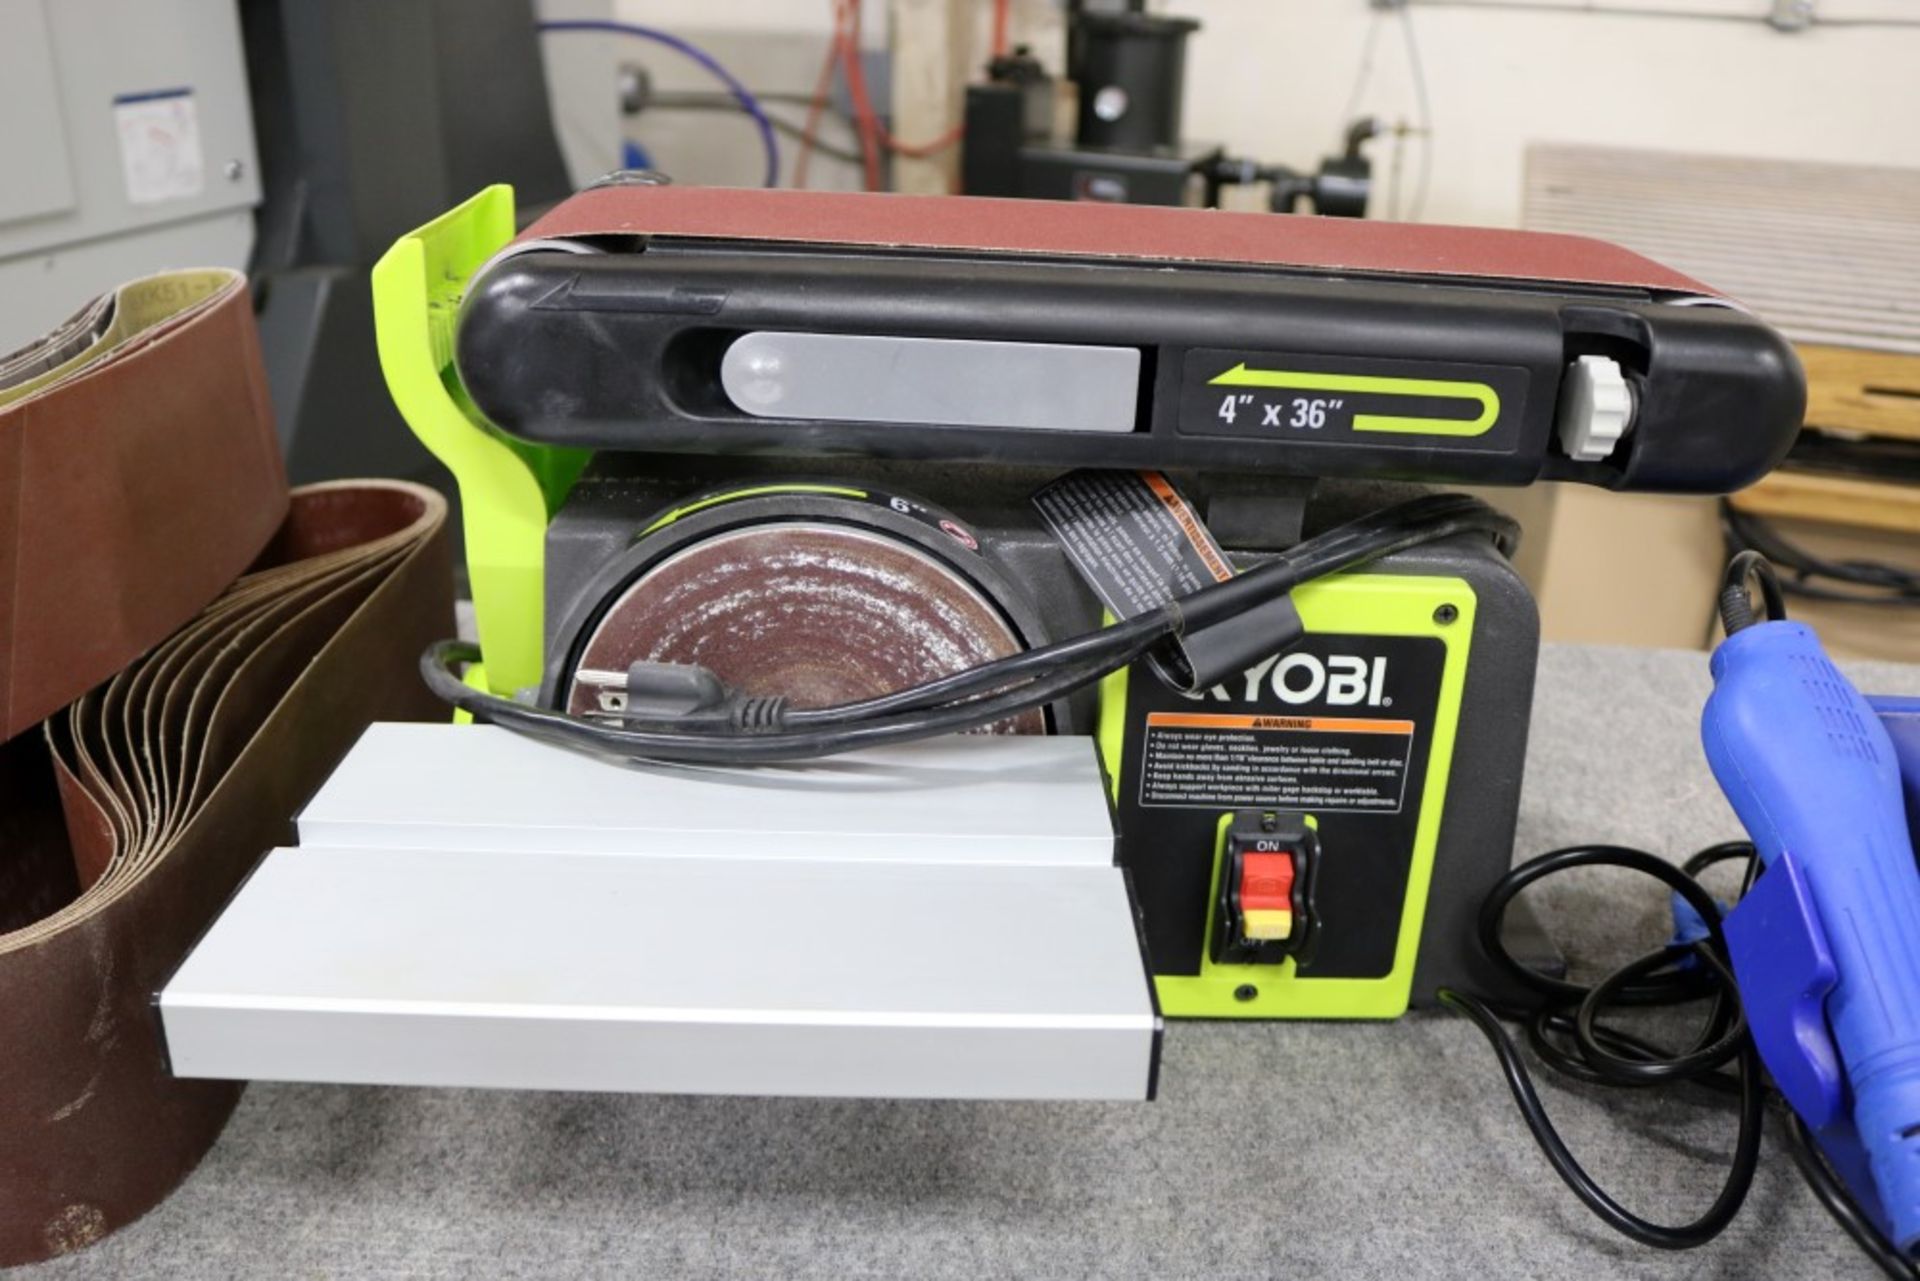 Ryobi 4" x 6" Belt and Disc Sander with Extra New Sanding Belts, also YiHua 878 AD- SMD ReWork - Image 2 of 9